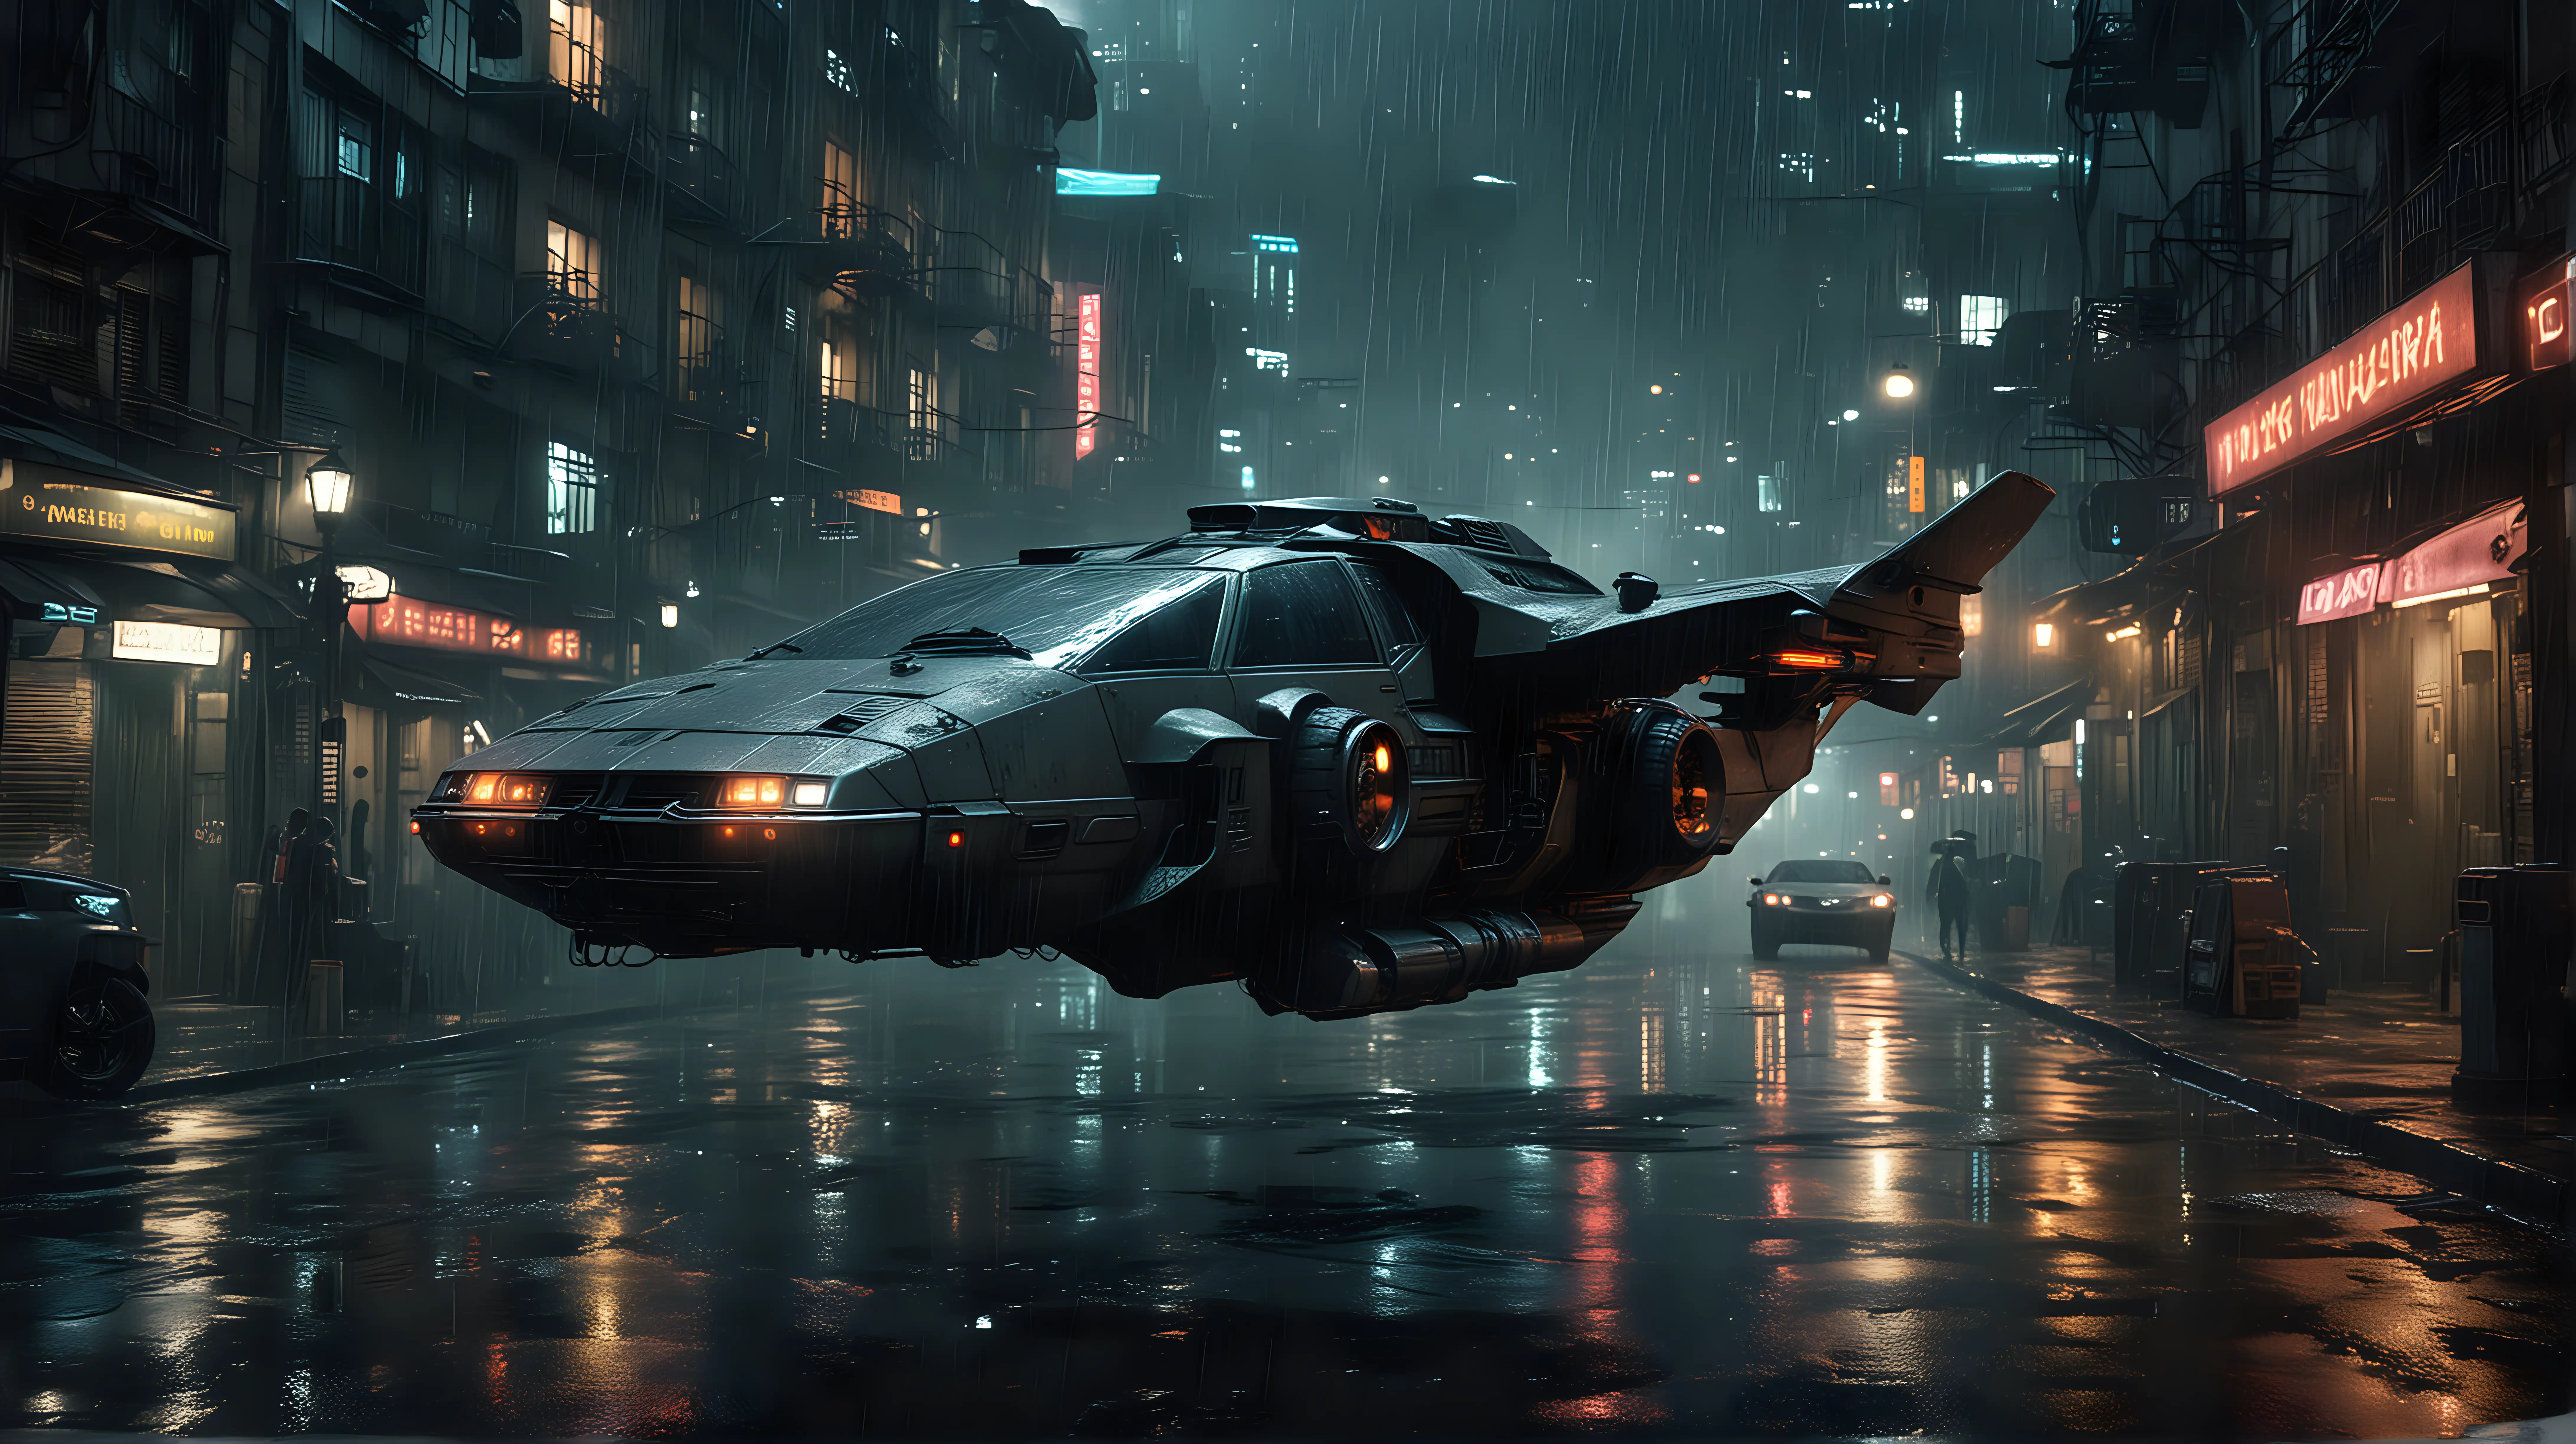 a flyimg car similar to that one from Blade Runner has landed in the wild street of a futuristic city, dark night , many lights, hard rain